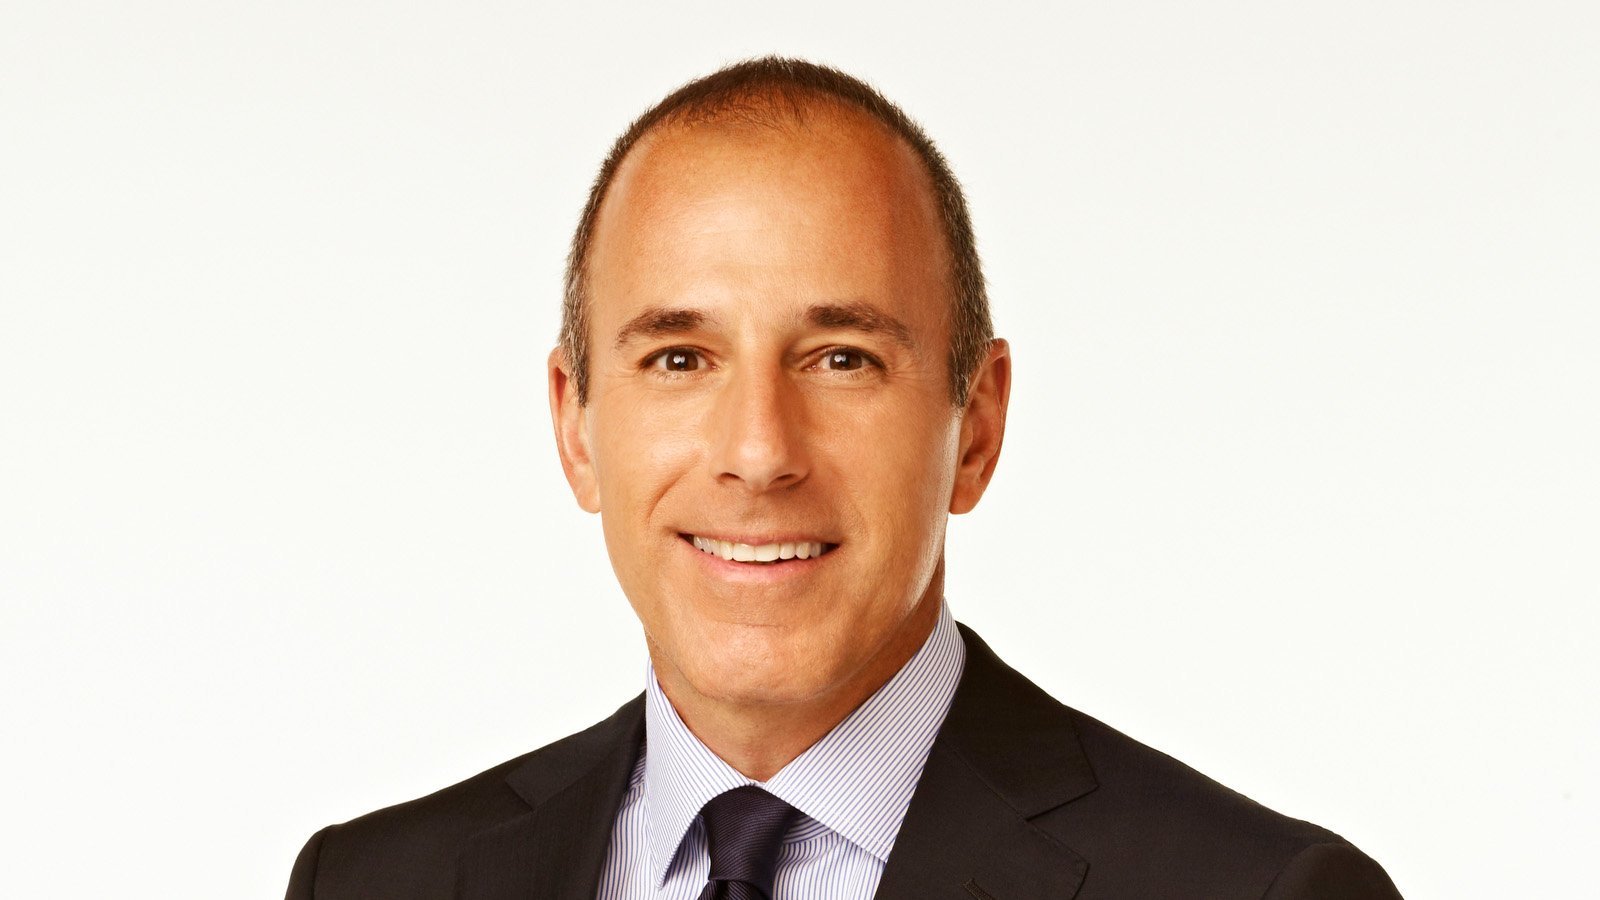 Matt Lauer was fired from NBC News on Wednesday after an employee filed a complaint about "inappropriate sexual behavior in the workplace," the network announced.